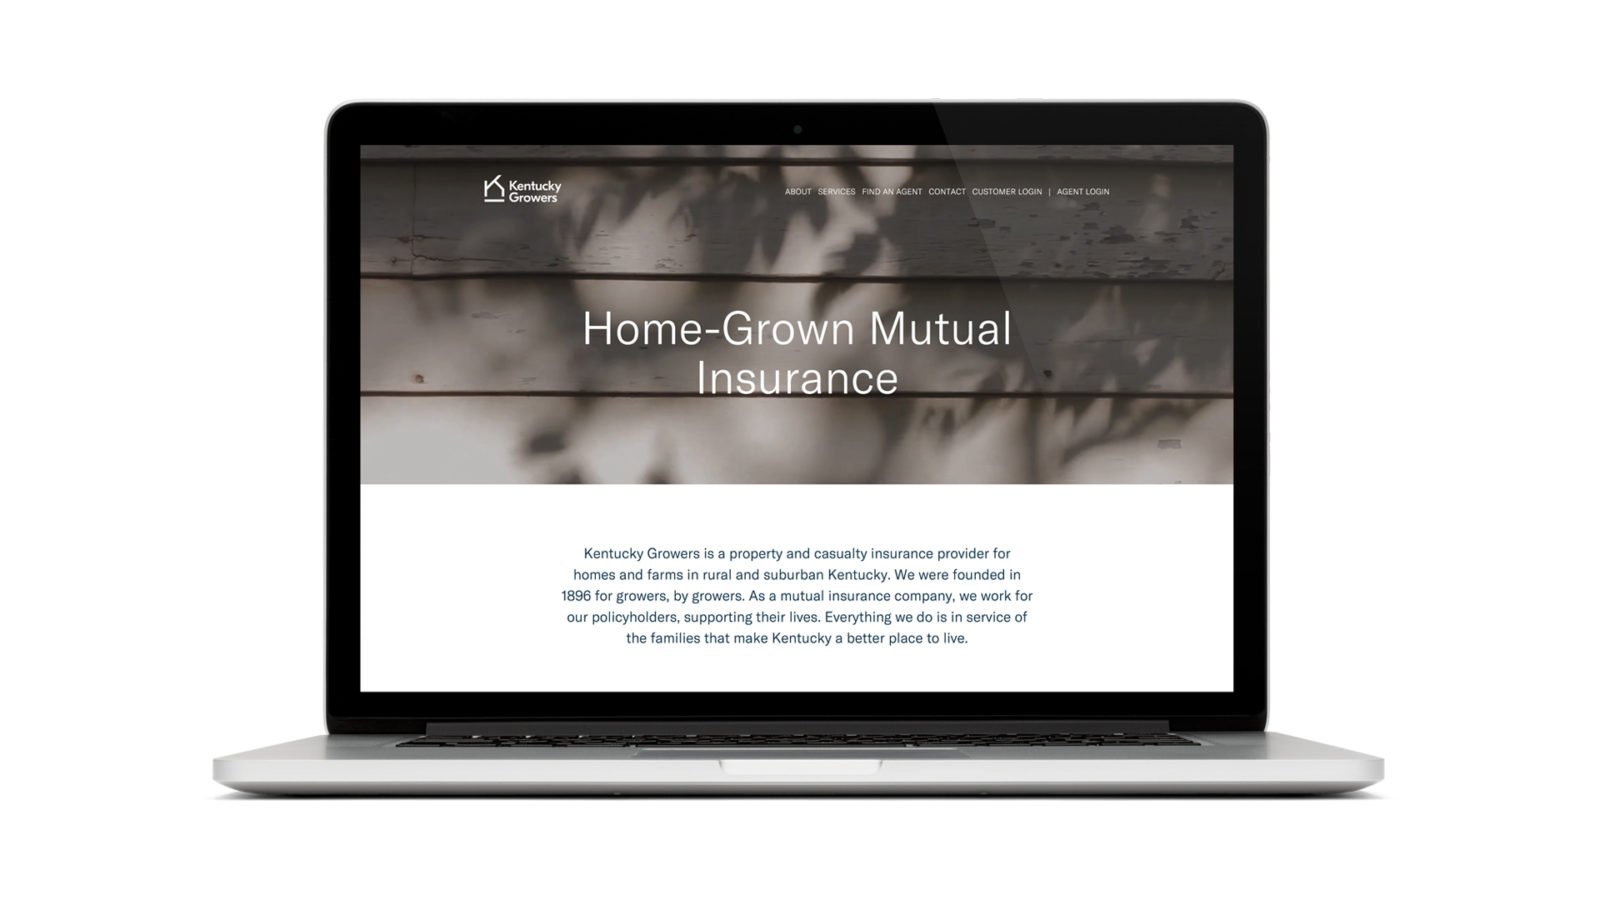 A brand identity and website design for Kentucky Growers Insurance